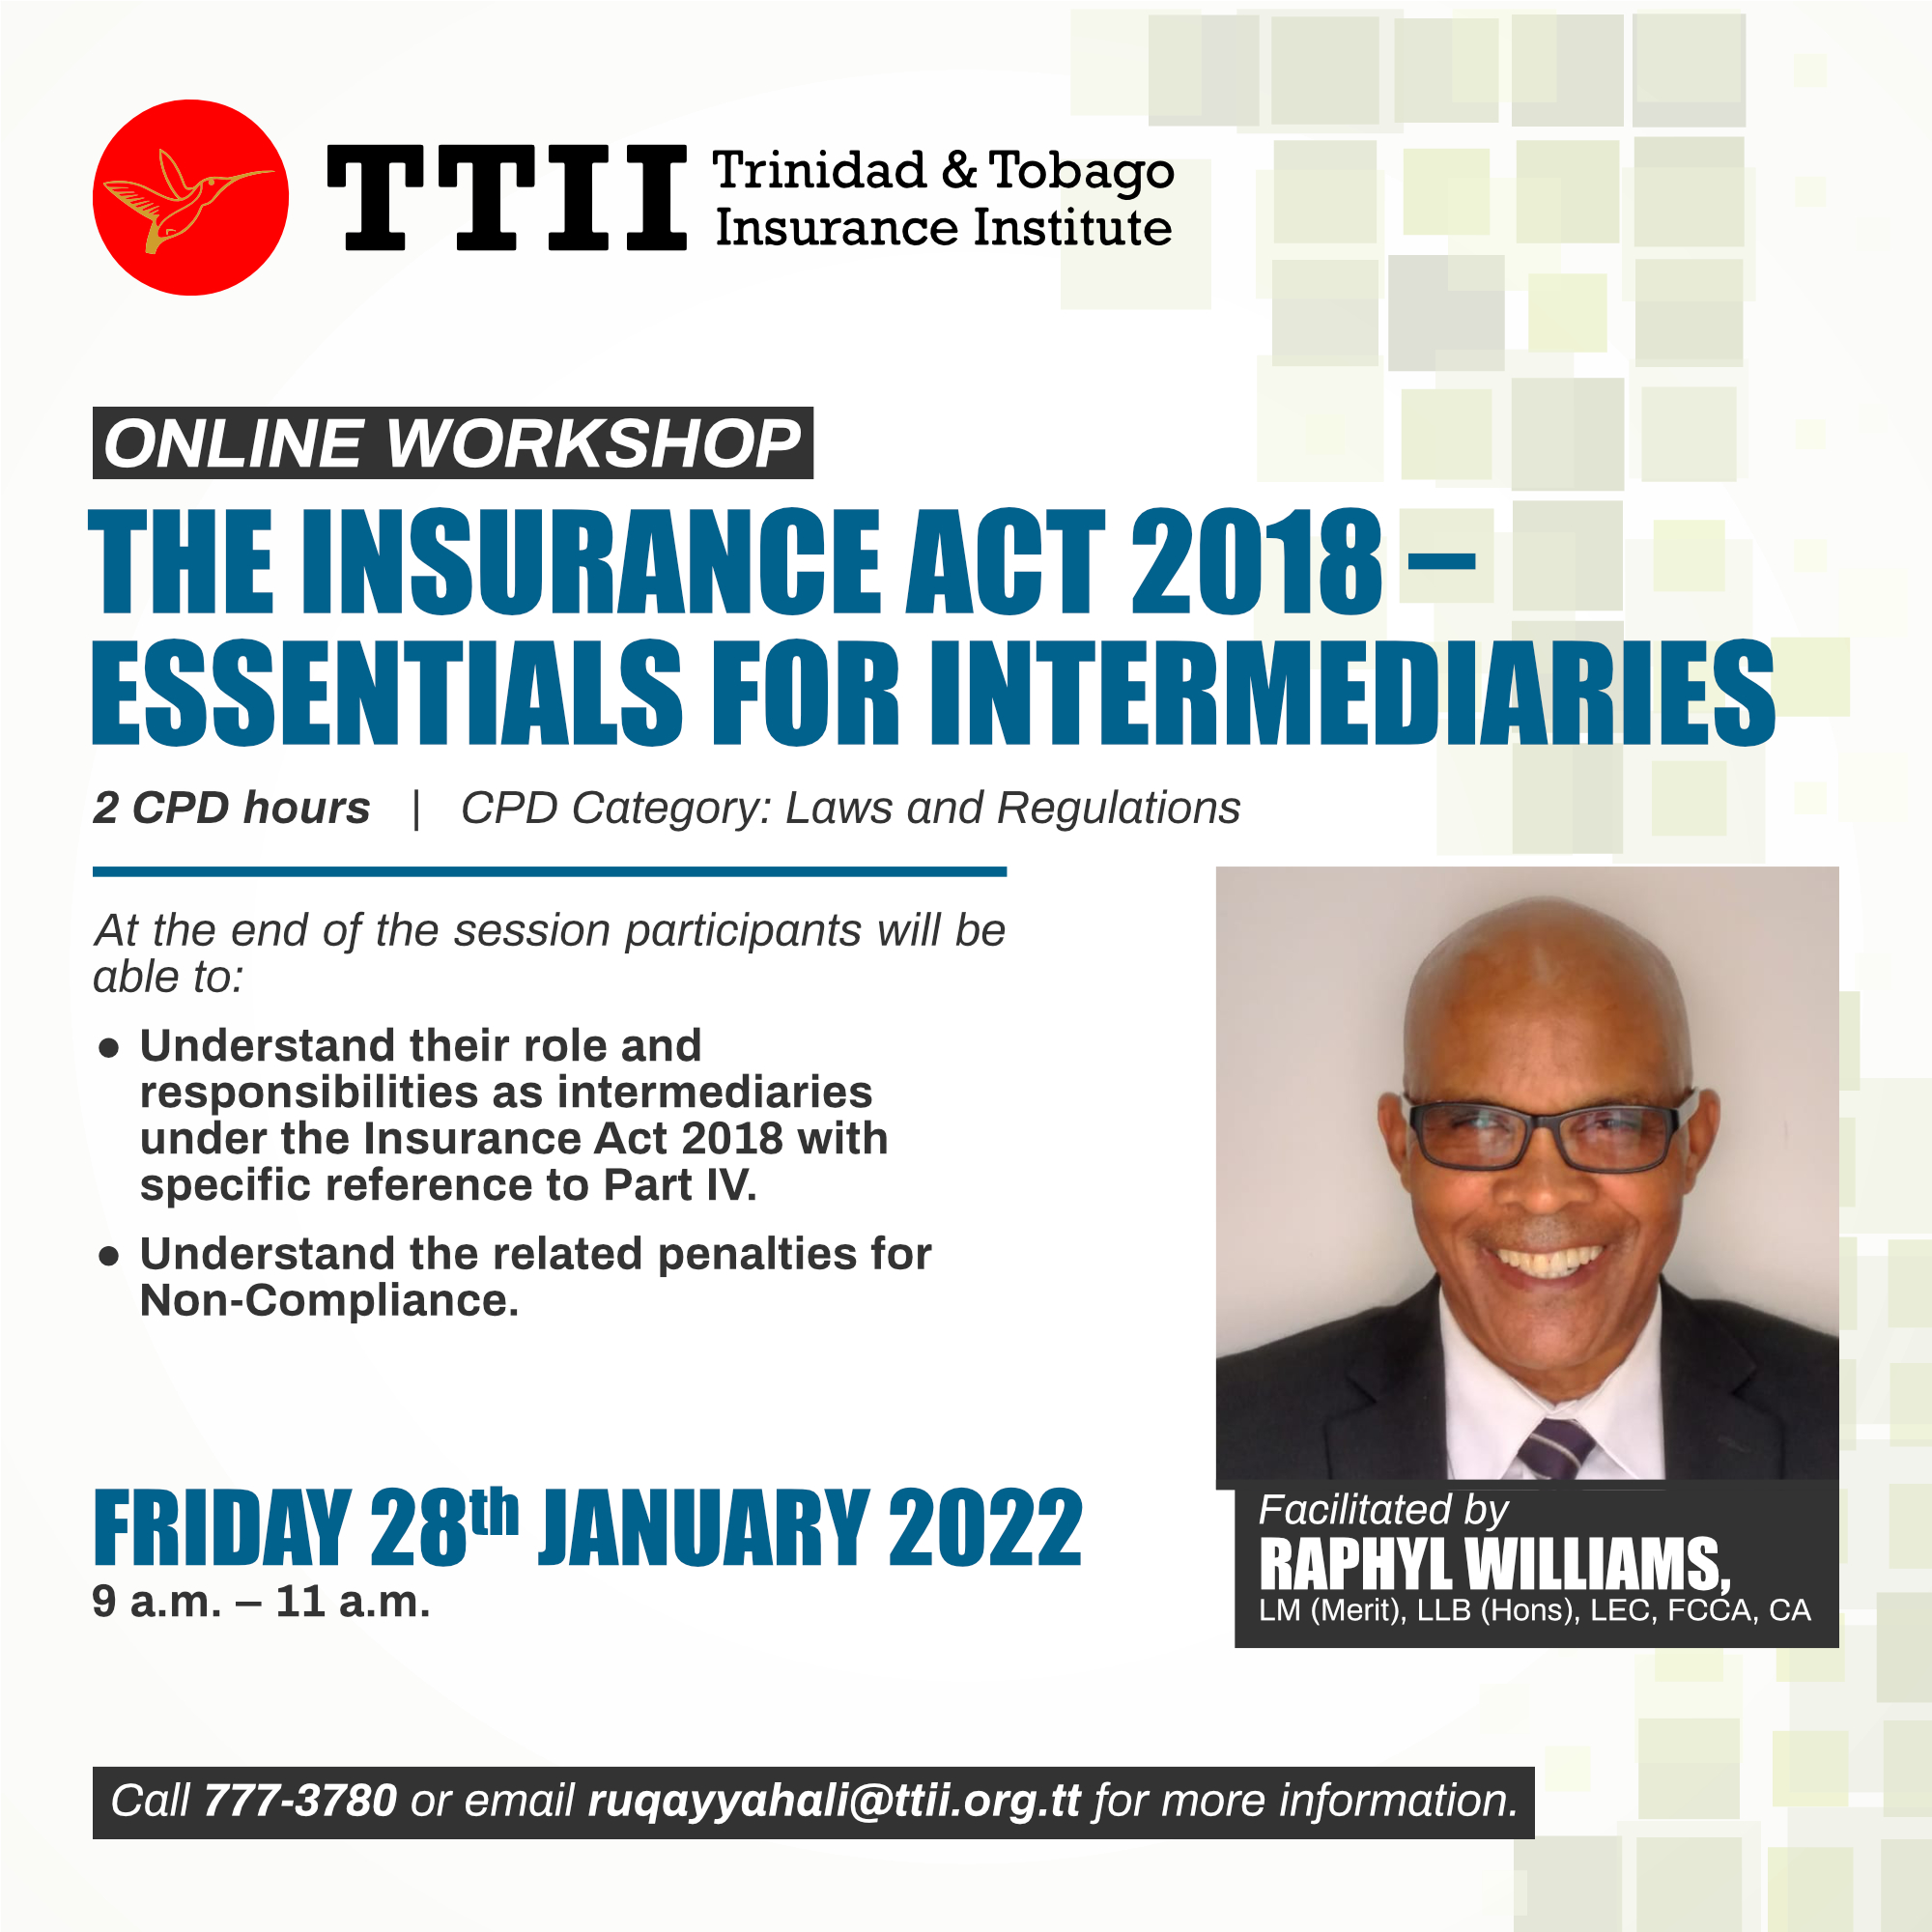 The Insurance Act 2018 – Essentials for Intermediaries